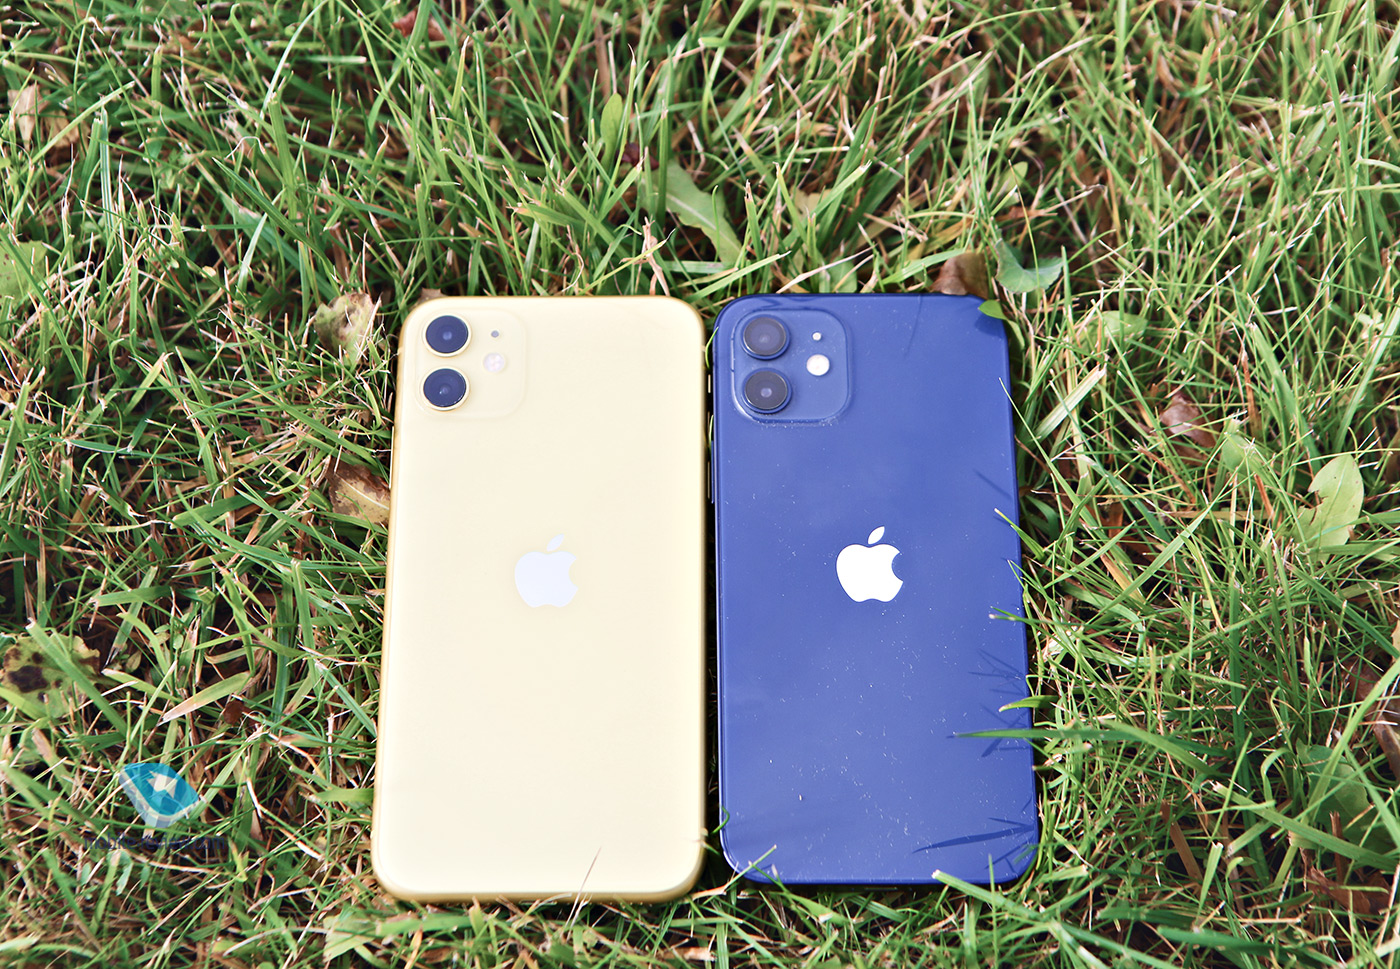 Buyer's guide. iPhone 11 vs iPhone 12, why the old iPhone is better